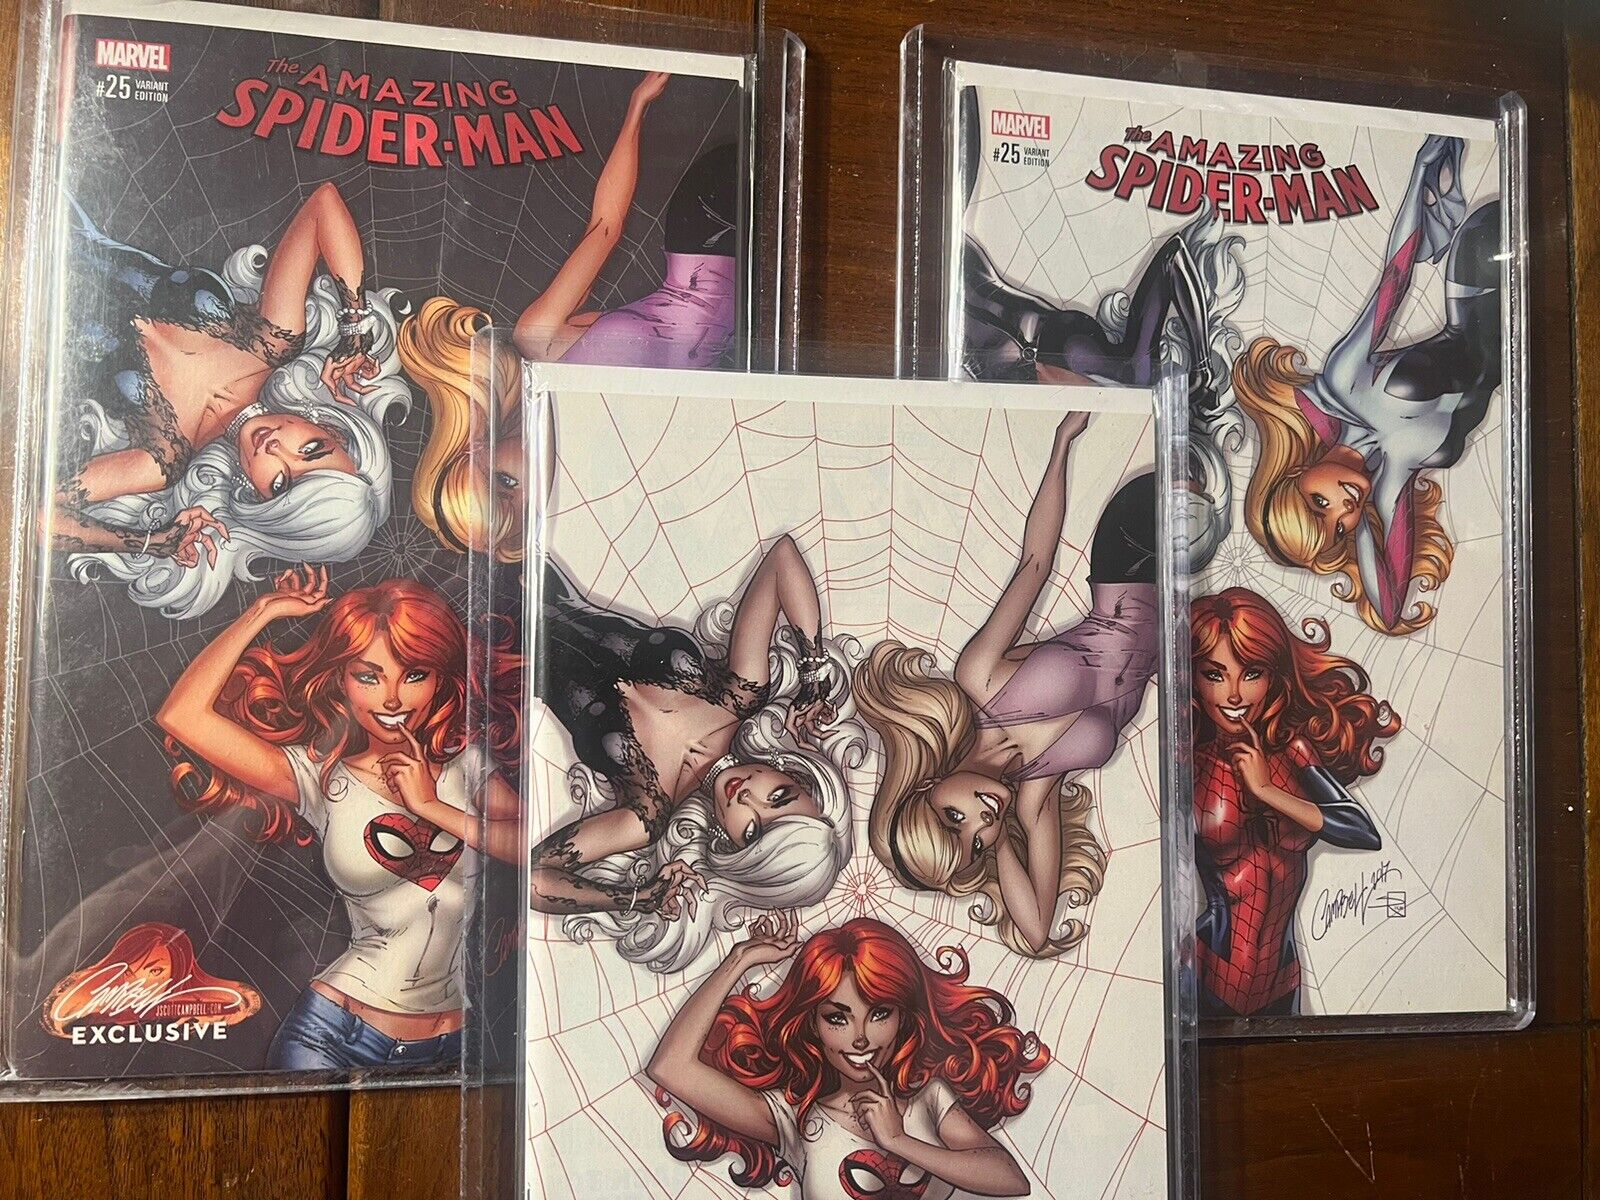 THE AMAZING SPIDER-MAN #25  5/17 CAMPBELL Variant Covers SET Of 3 NEW NM UNREAD